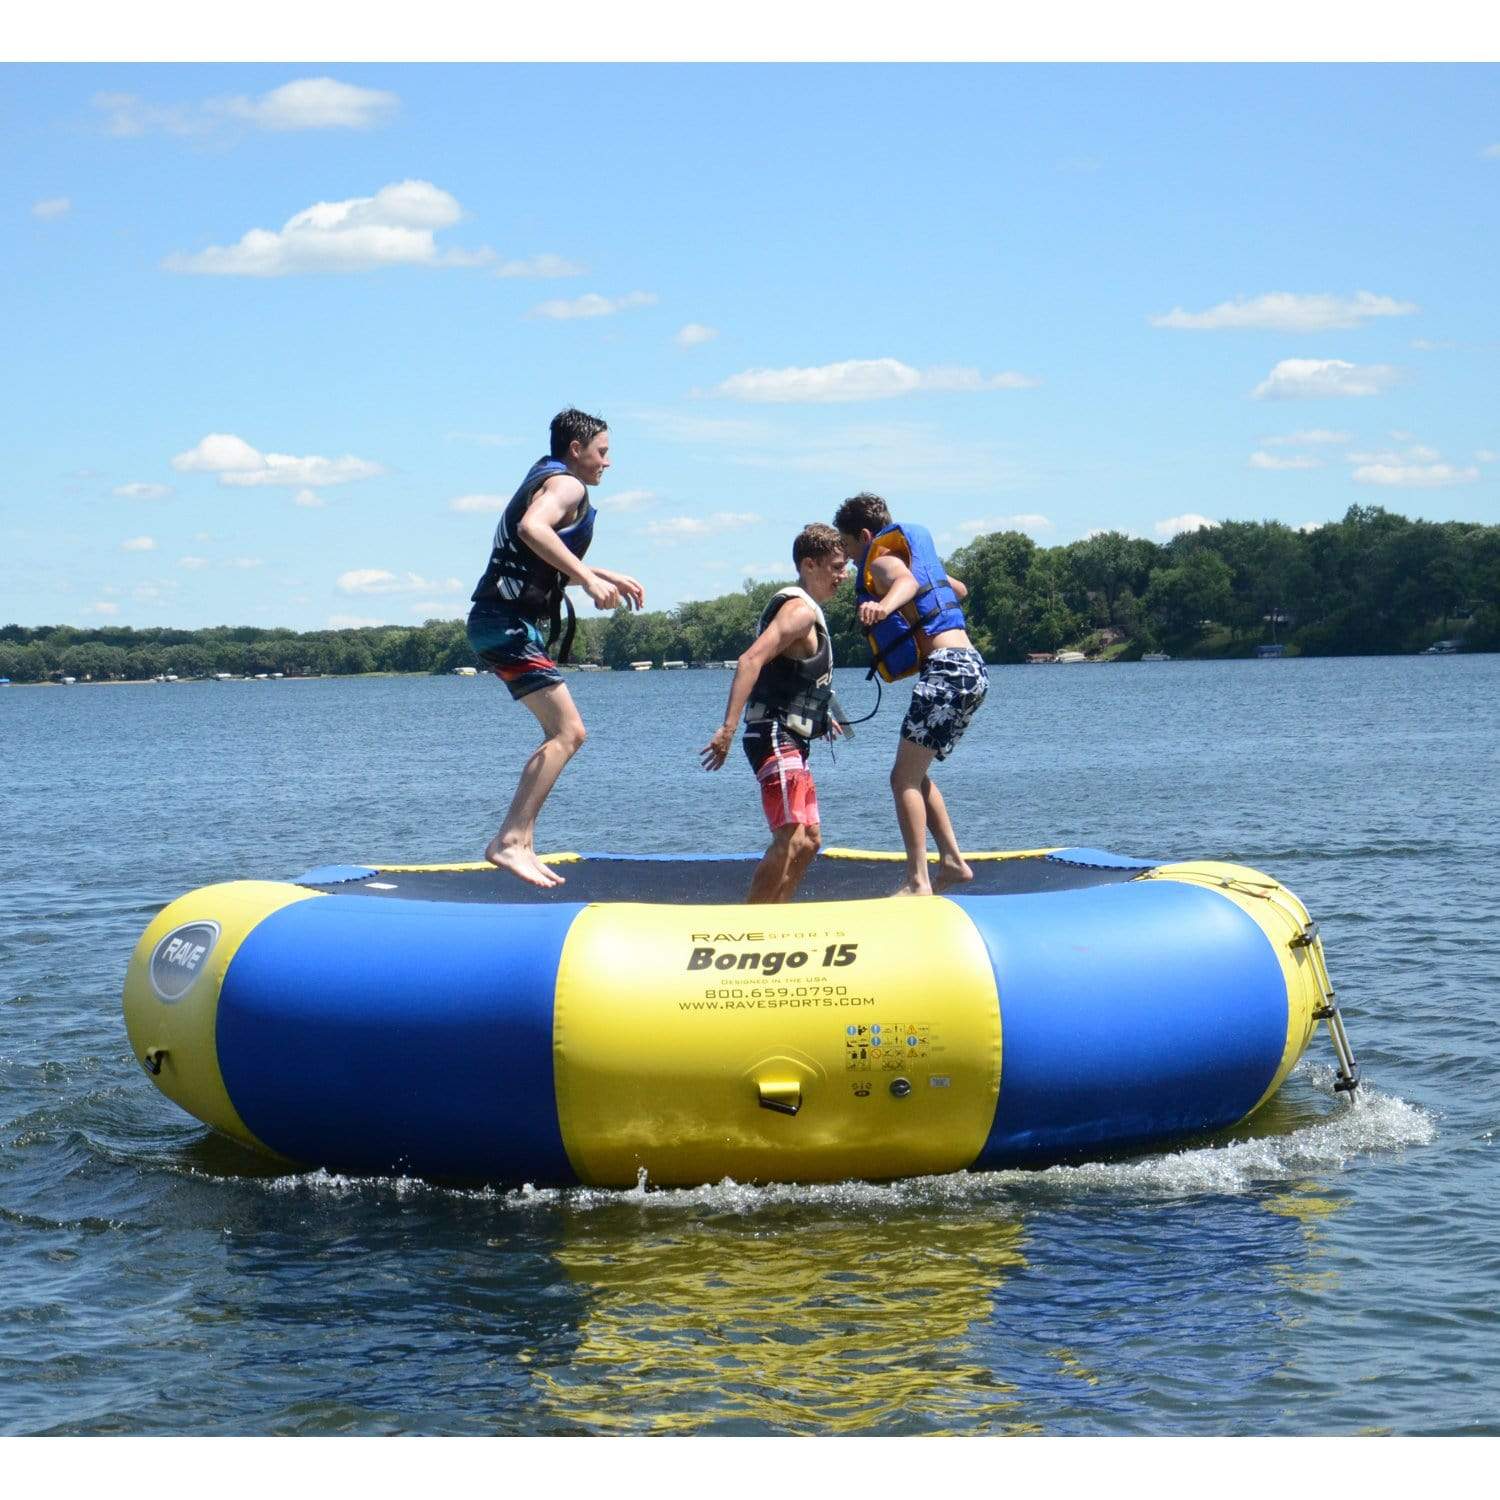 Trampoline water toy - Bongo 10 Water Bouncer - RAVE Sports - inflatable